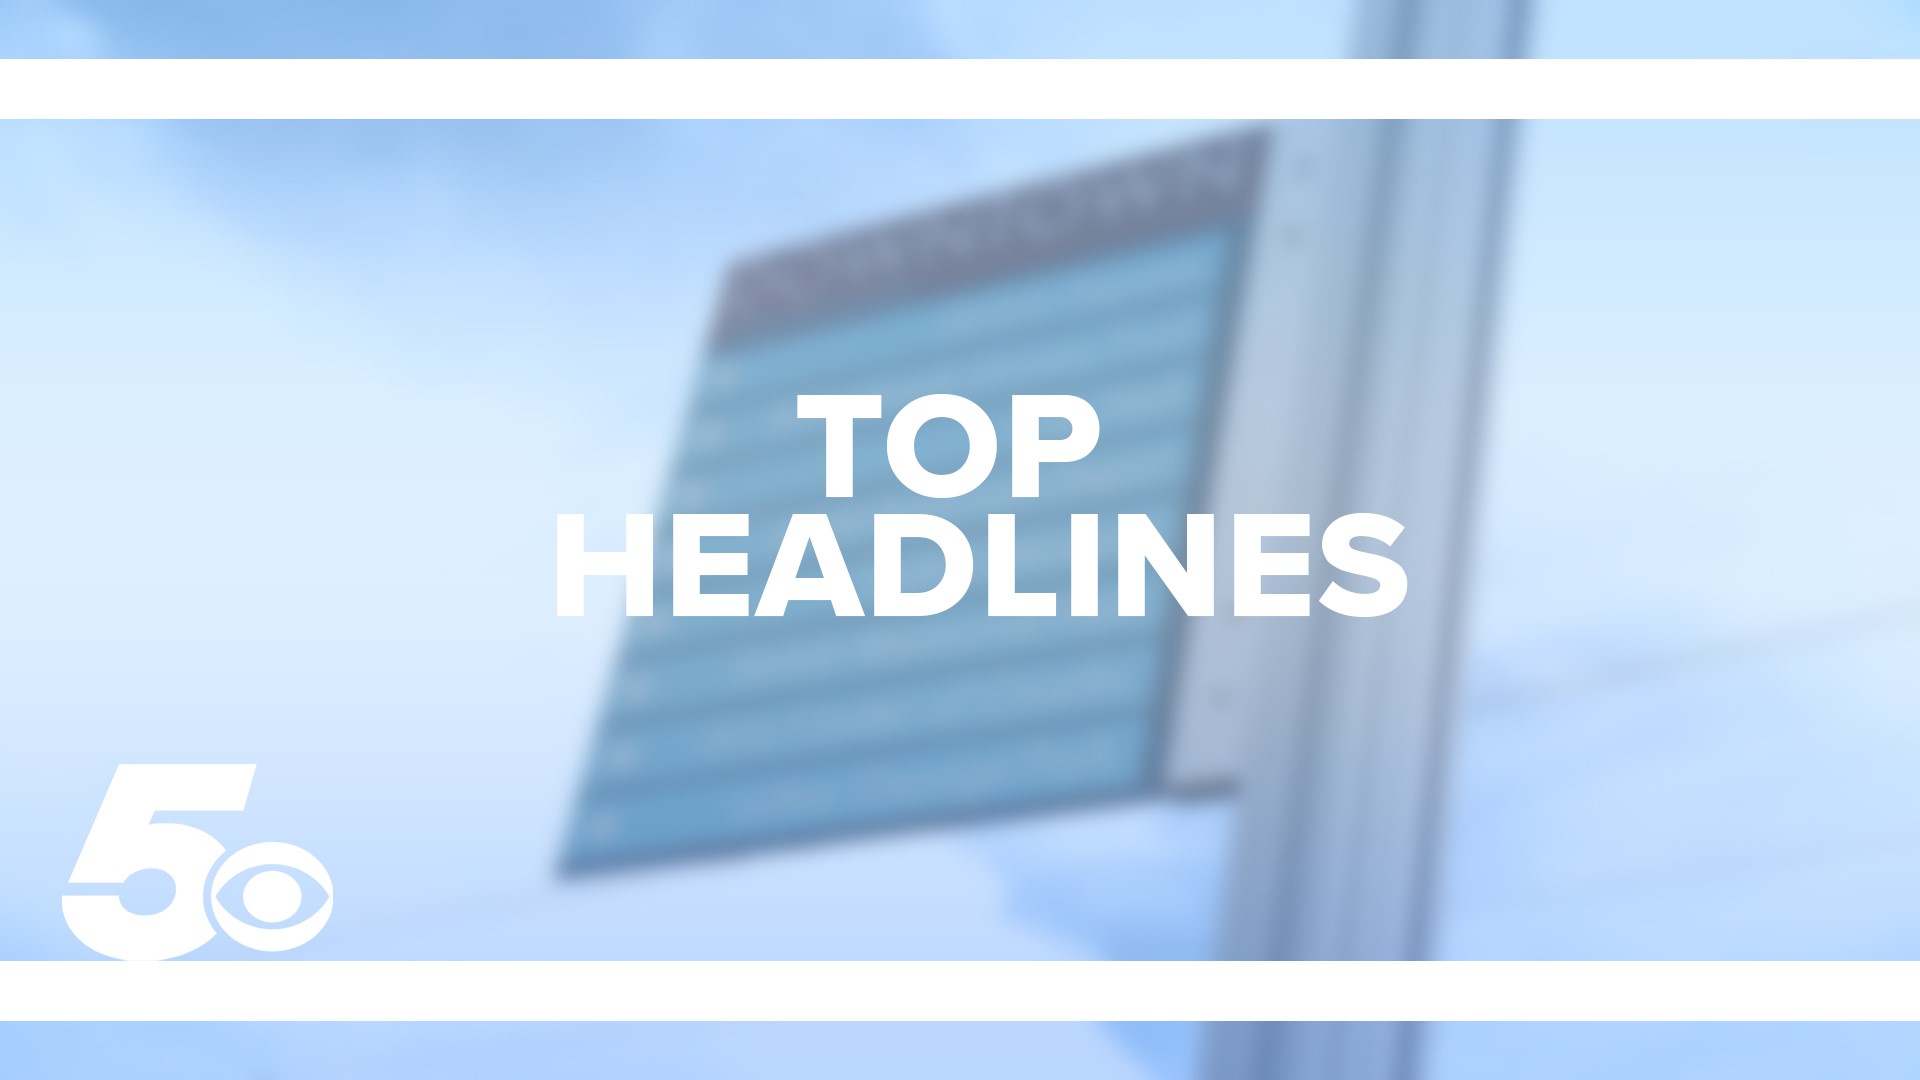 Take a look at today's top headlines for local news across Northwest Arkansas and the River Valley!